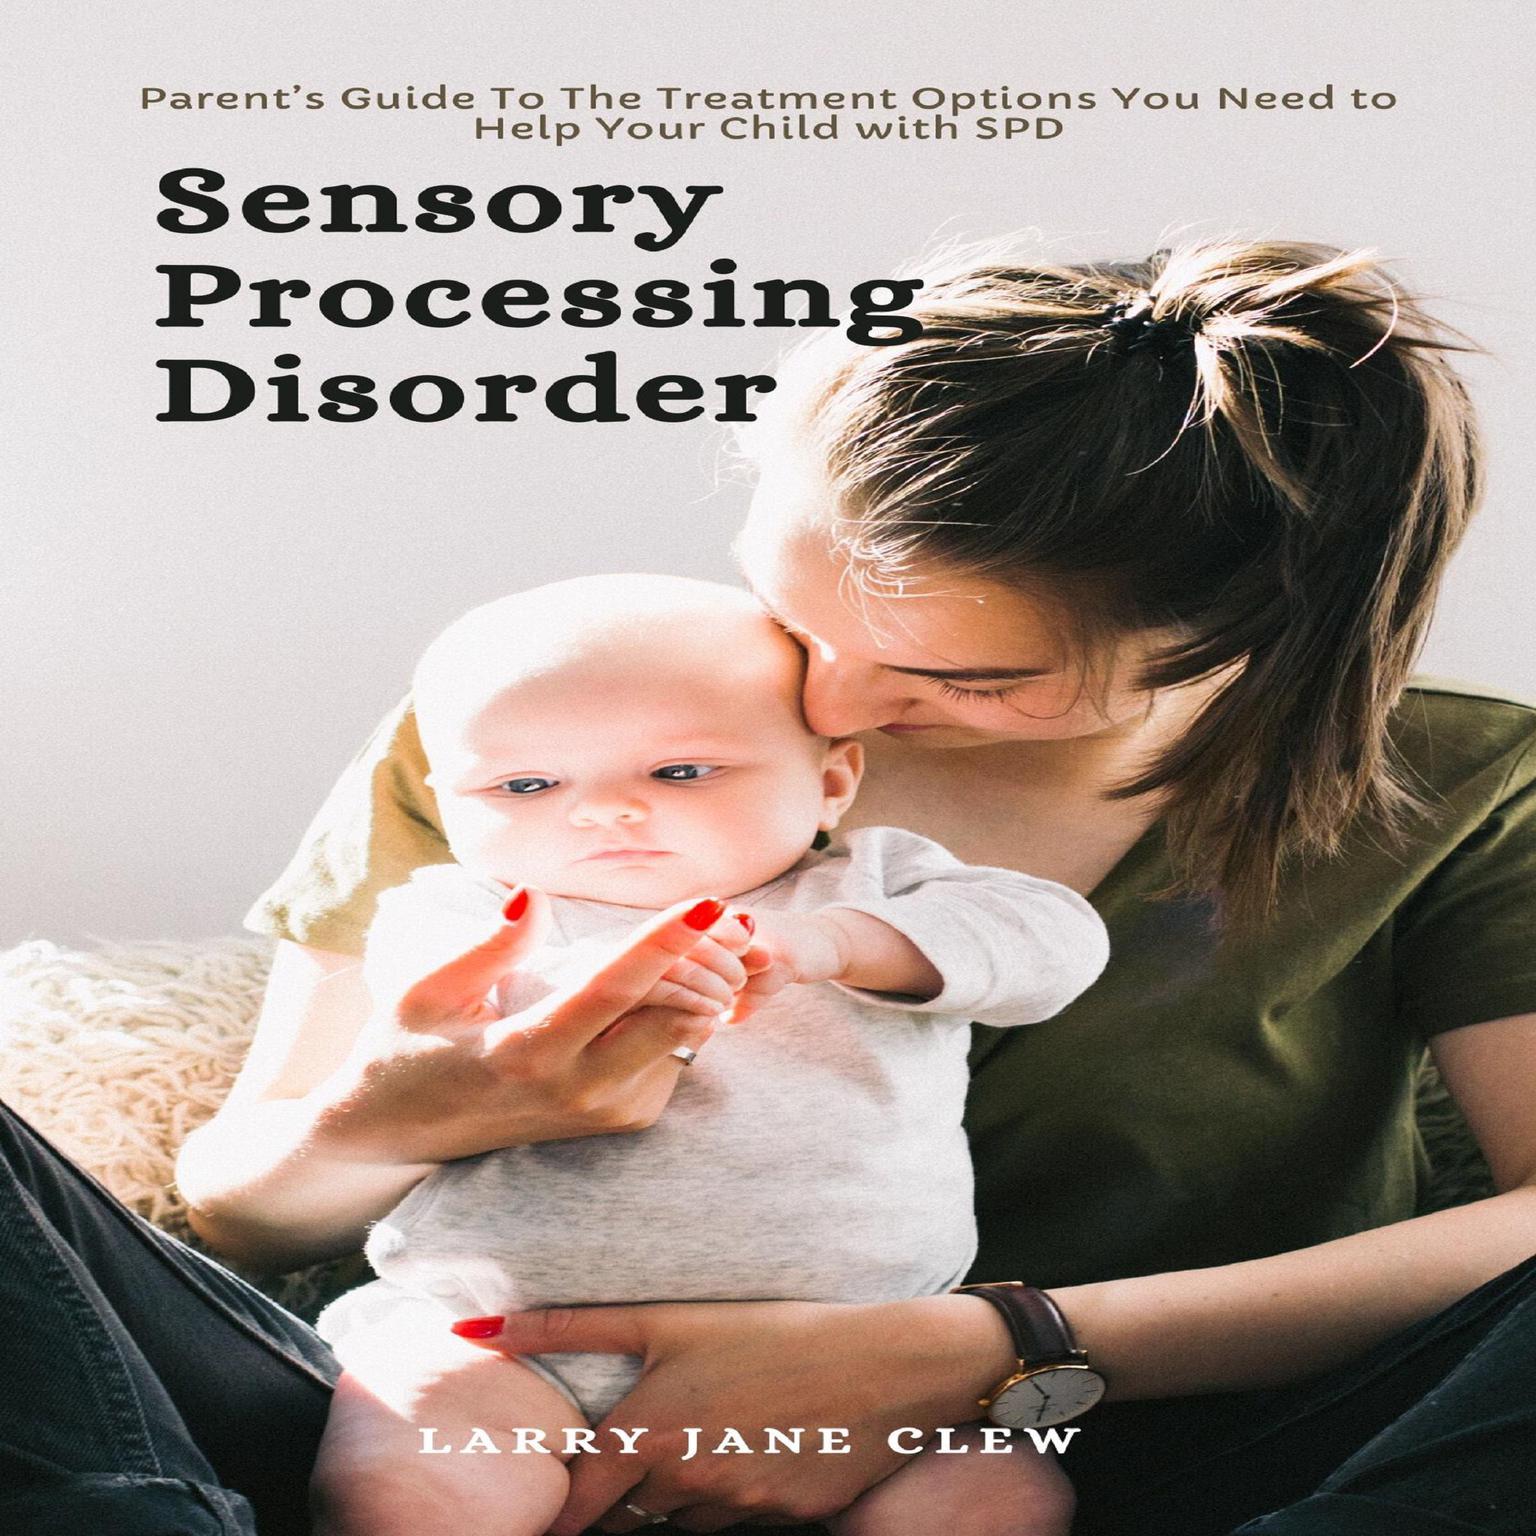 Sensory Processing Disorder: Parent’s Guide to the Treatment Options You Need to Help Your Child with SPD Audiobook, by Larry Jane Clew